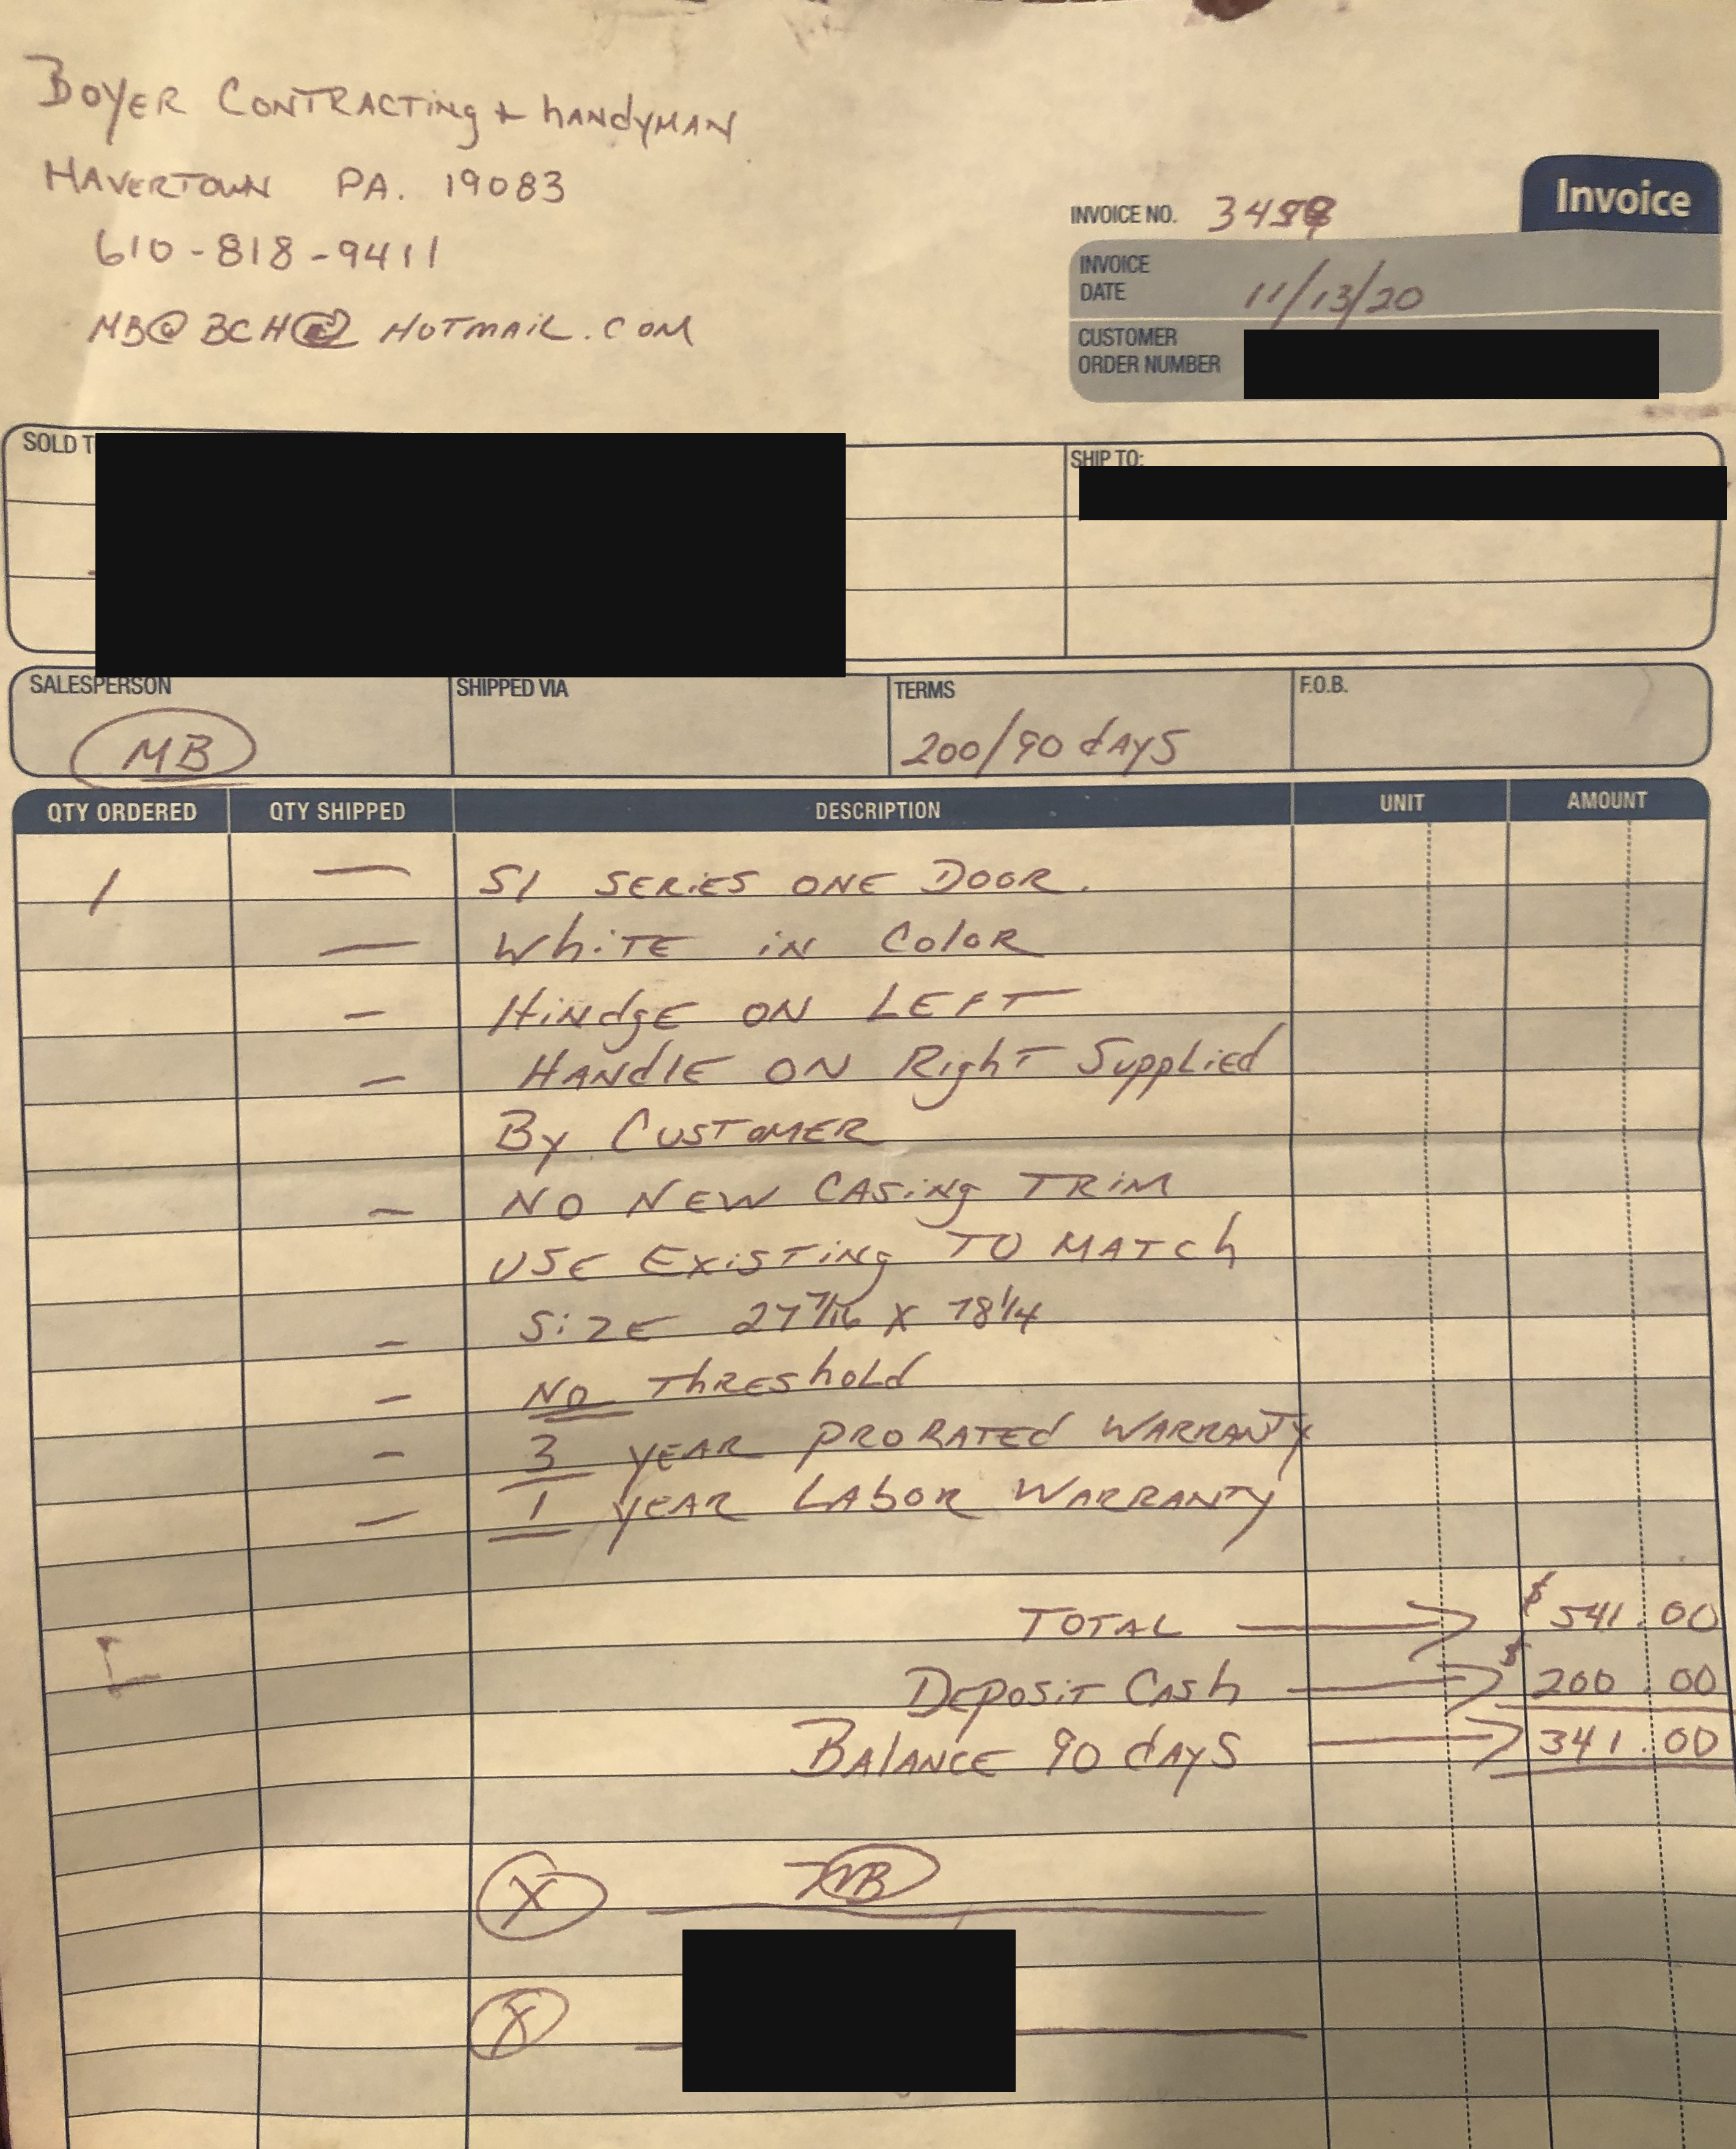 example of an invoice